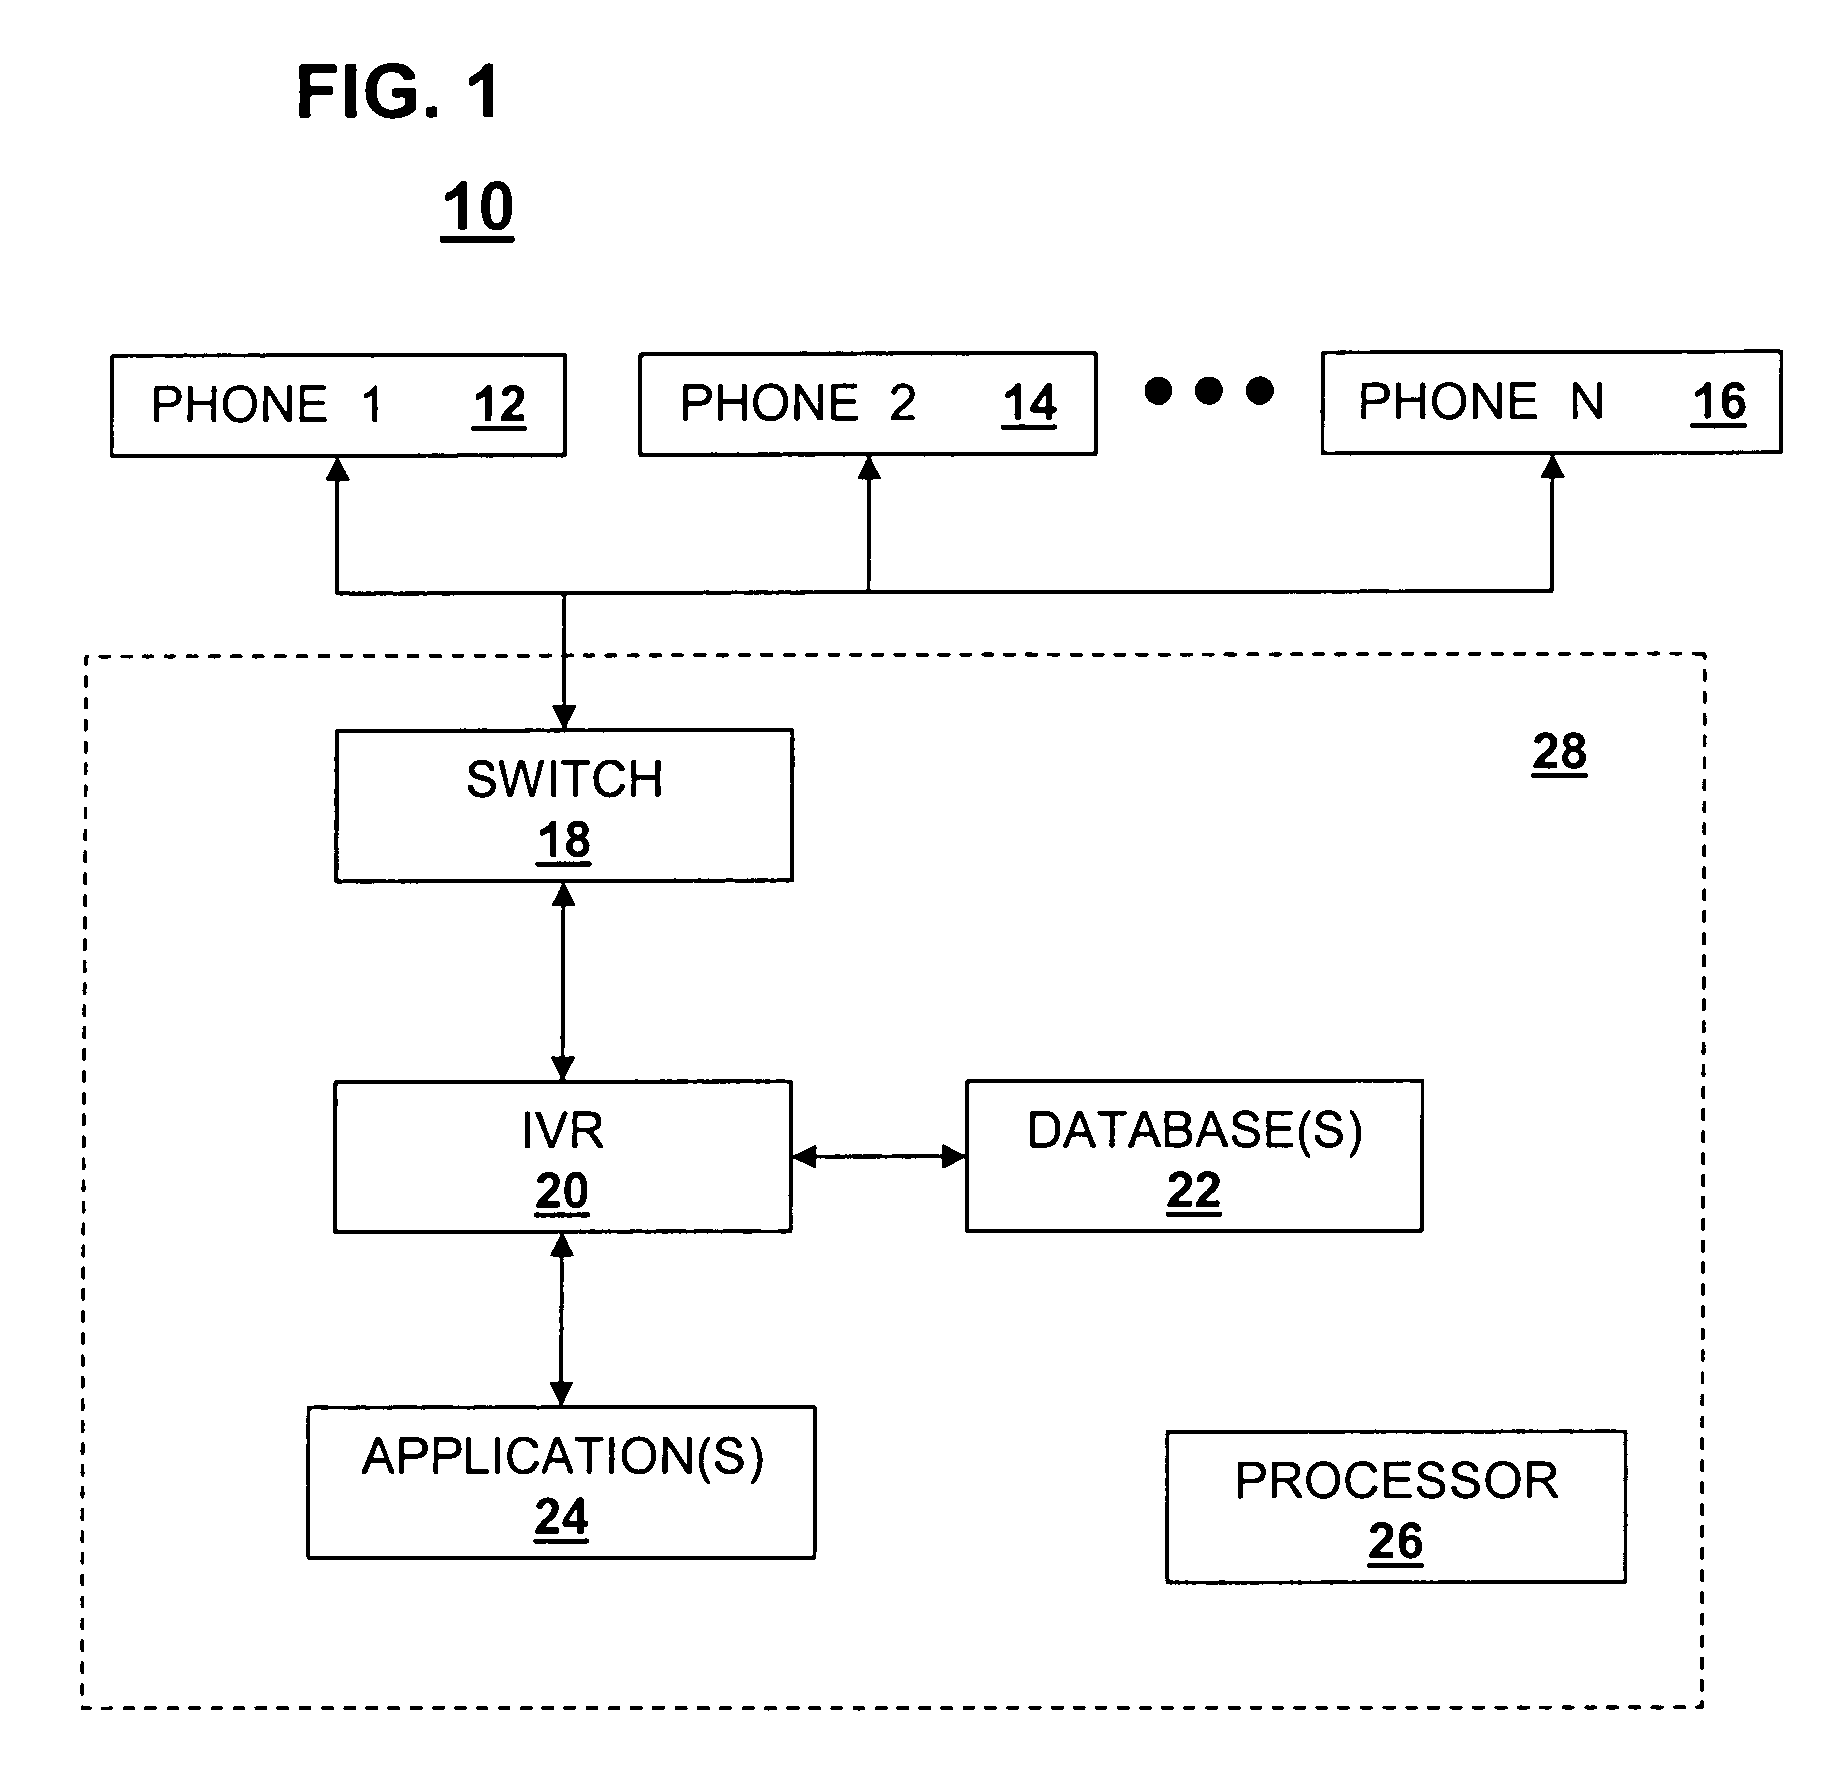 Dynamic allocation of voice ports and menu options in an interactive voice recognition system